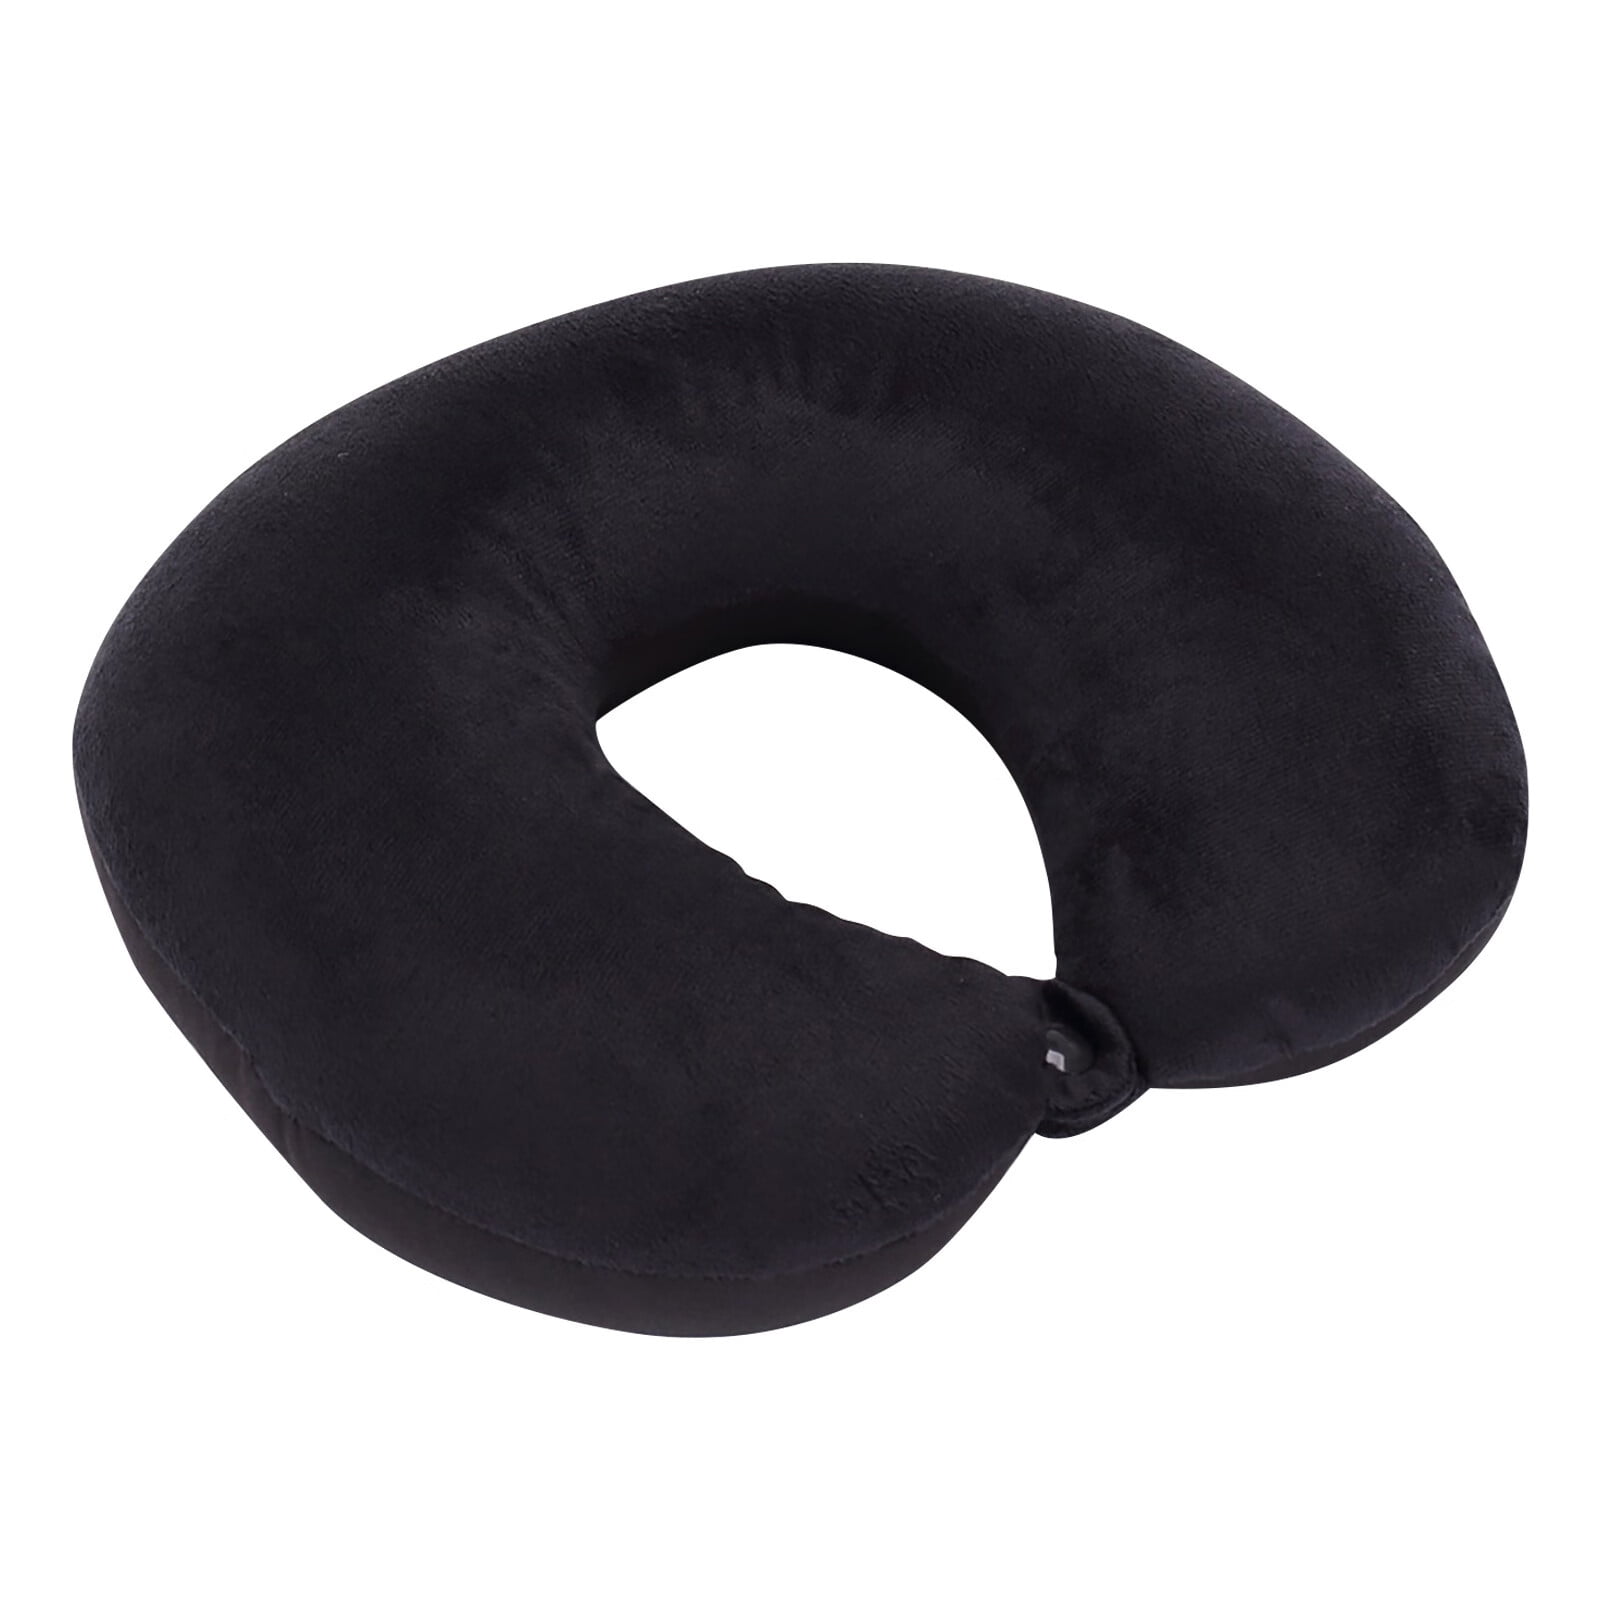 Seat Cushion Travel Neck Pillow Memory Foam Airplane Travel Comfortable  Washable Cover Plane Neck Support Pillow for Neck Sleeping Cloth Navy